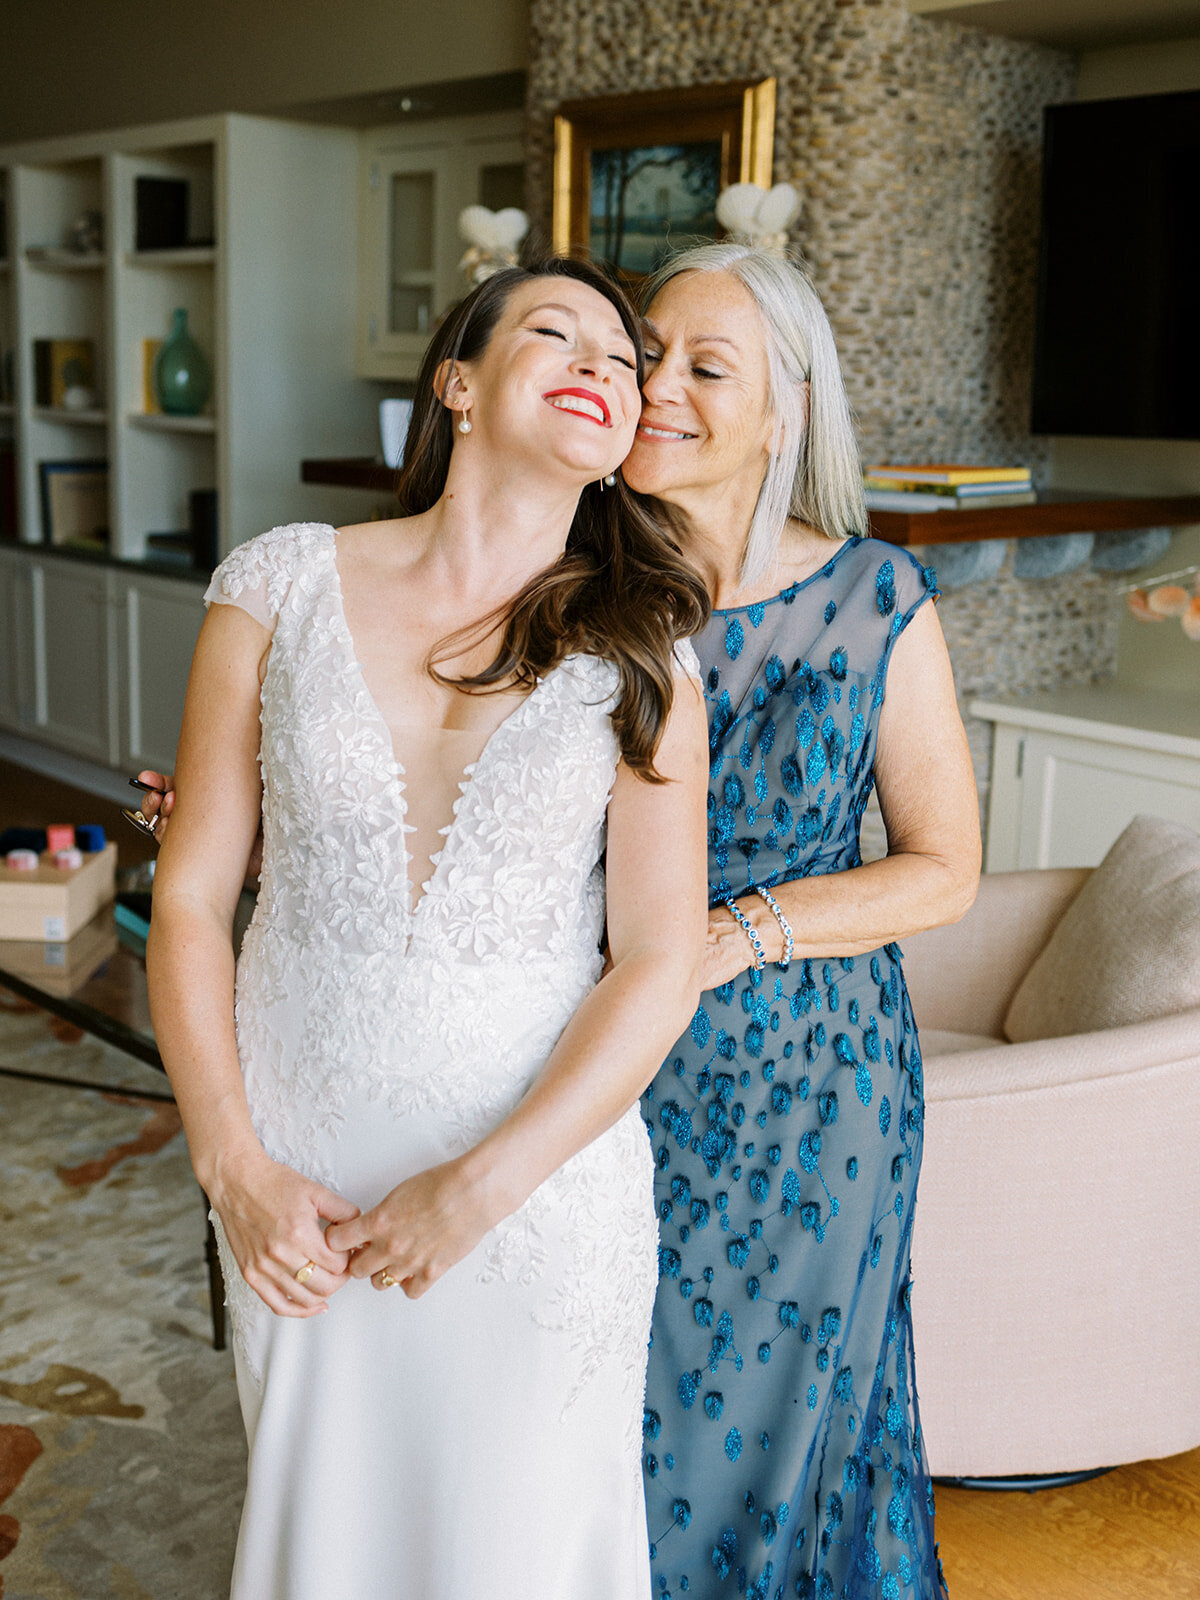 erica-renee-beauty-hair-and-makeup-duo-traveling-team-Ocean-House-Watch-Hill-Westerly-Wedding-Red-Lip-silver-platinum-hair-chic-modern-summer-mother-daughter-beauty